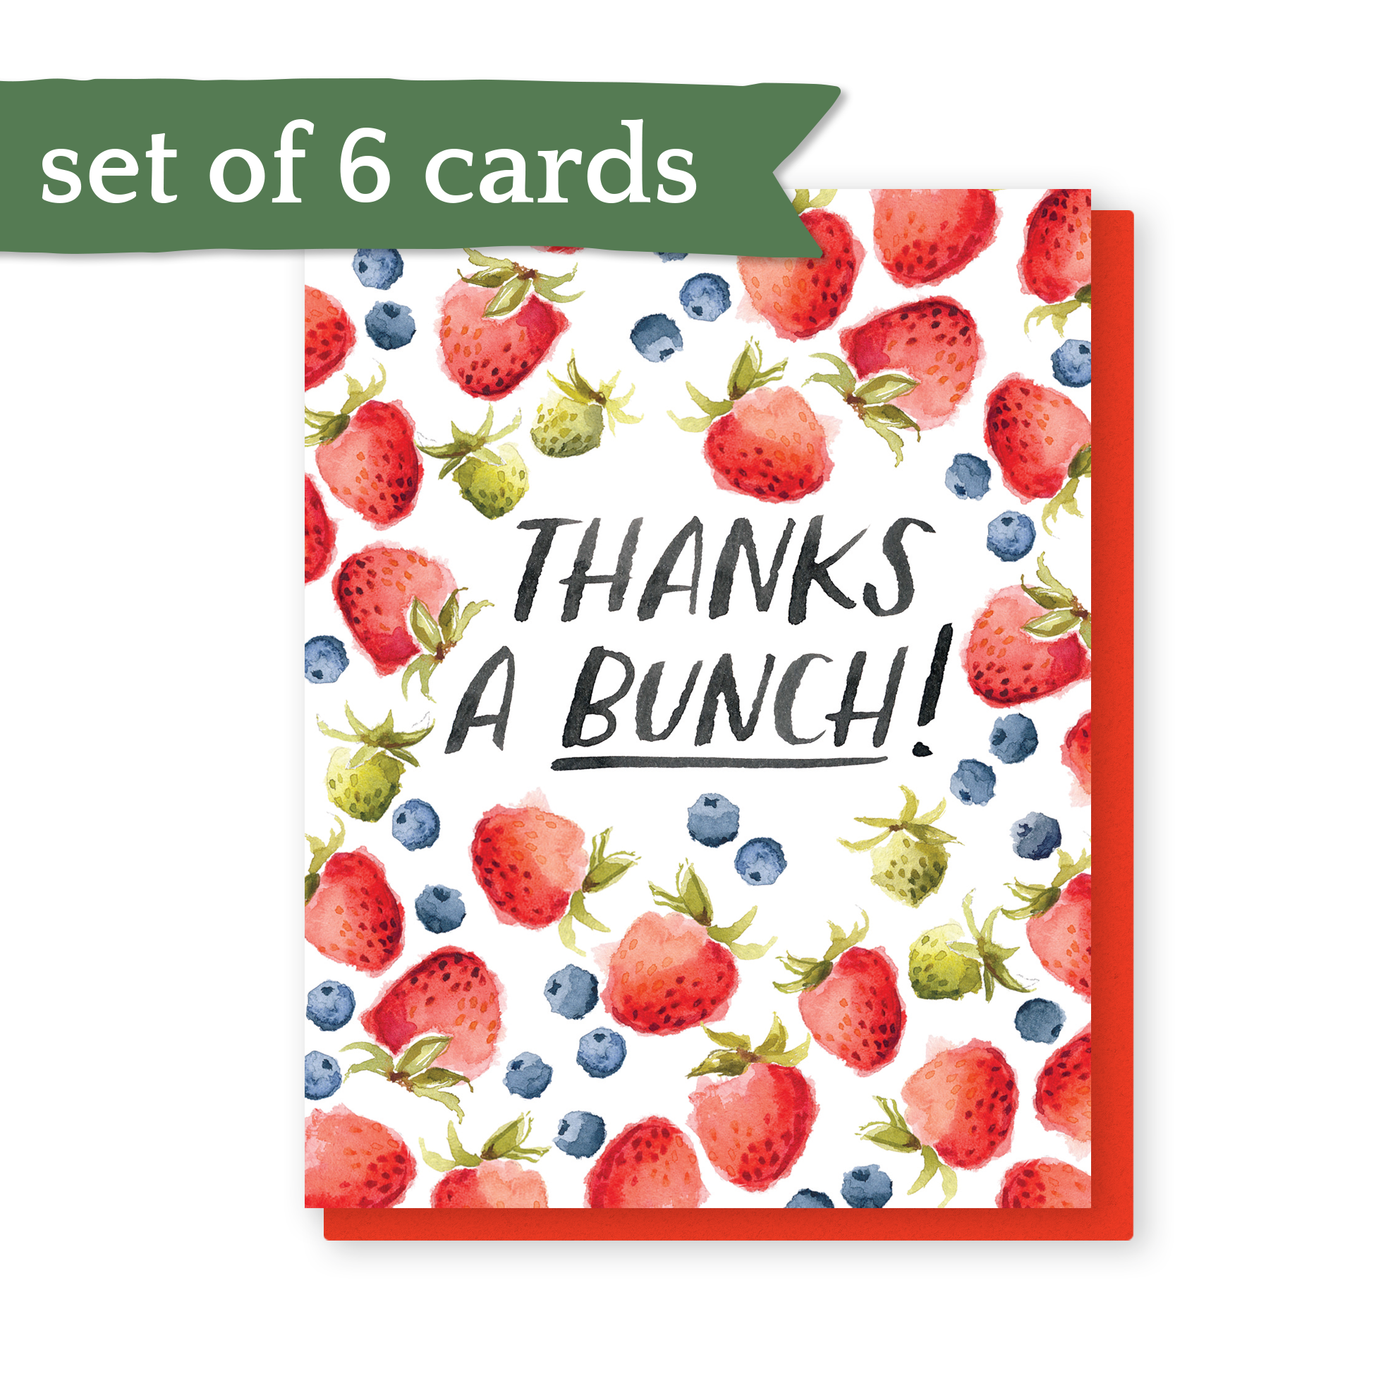 set of 6 thanks a bunch! strawberries and blueberries cards